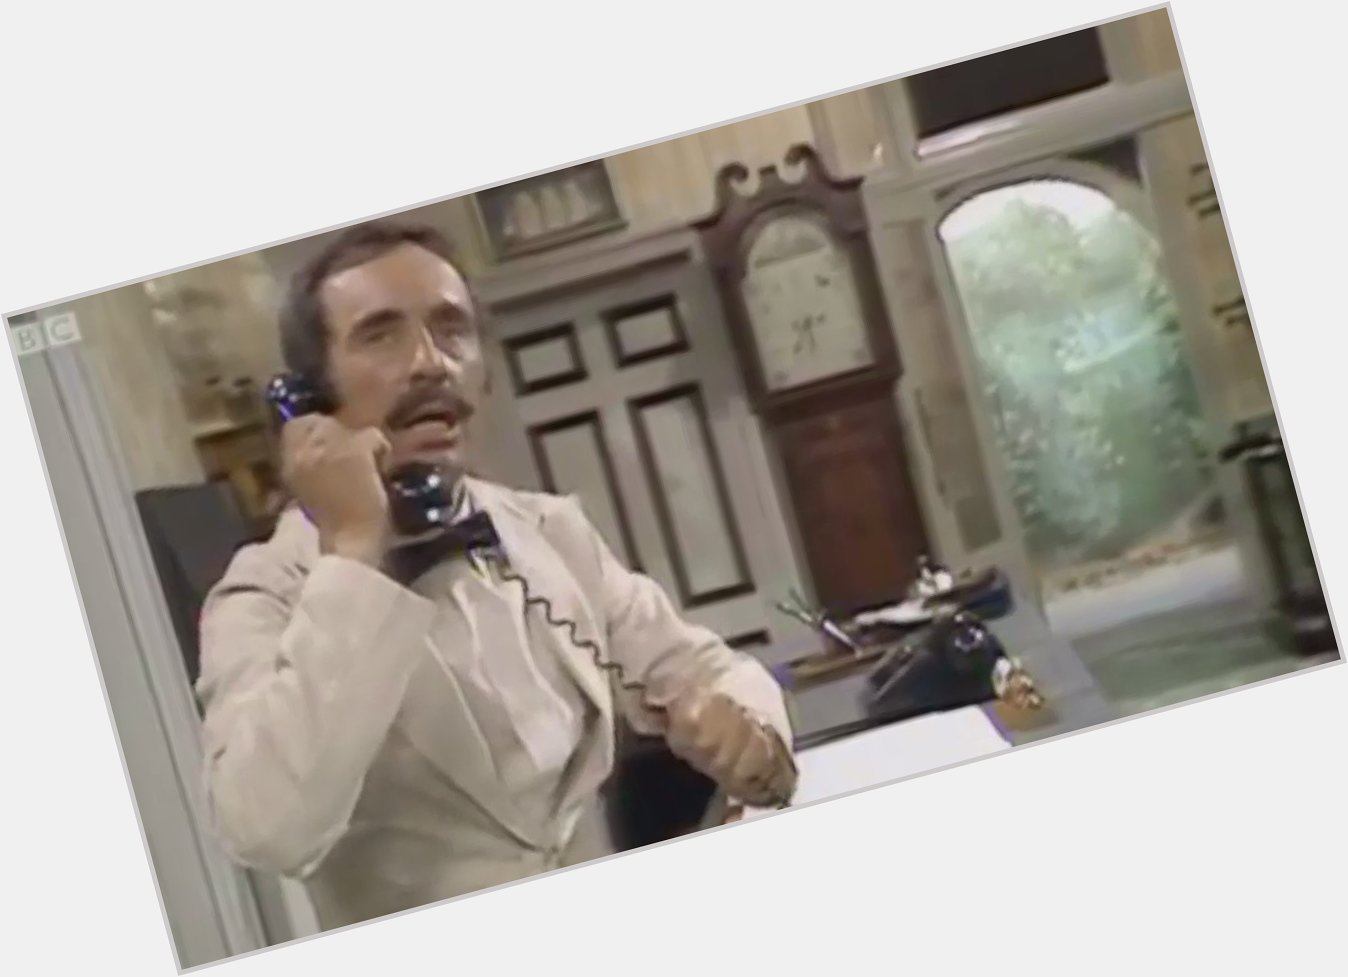 Happy birthday to the late
Andrew Sachs. 

We miss you. 

